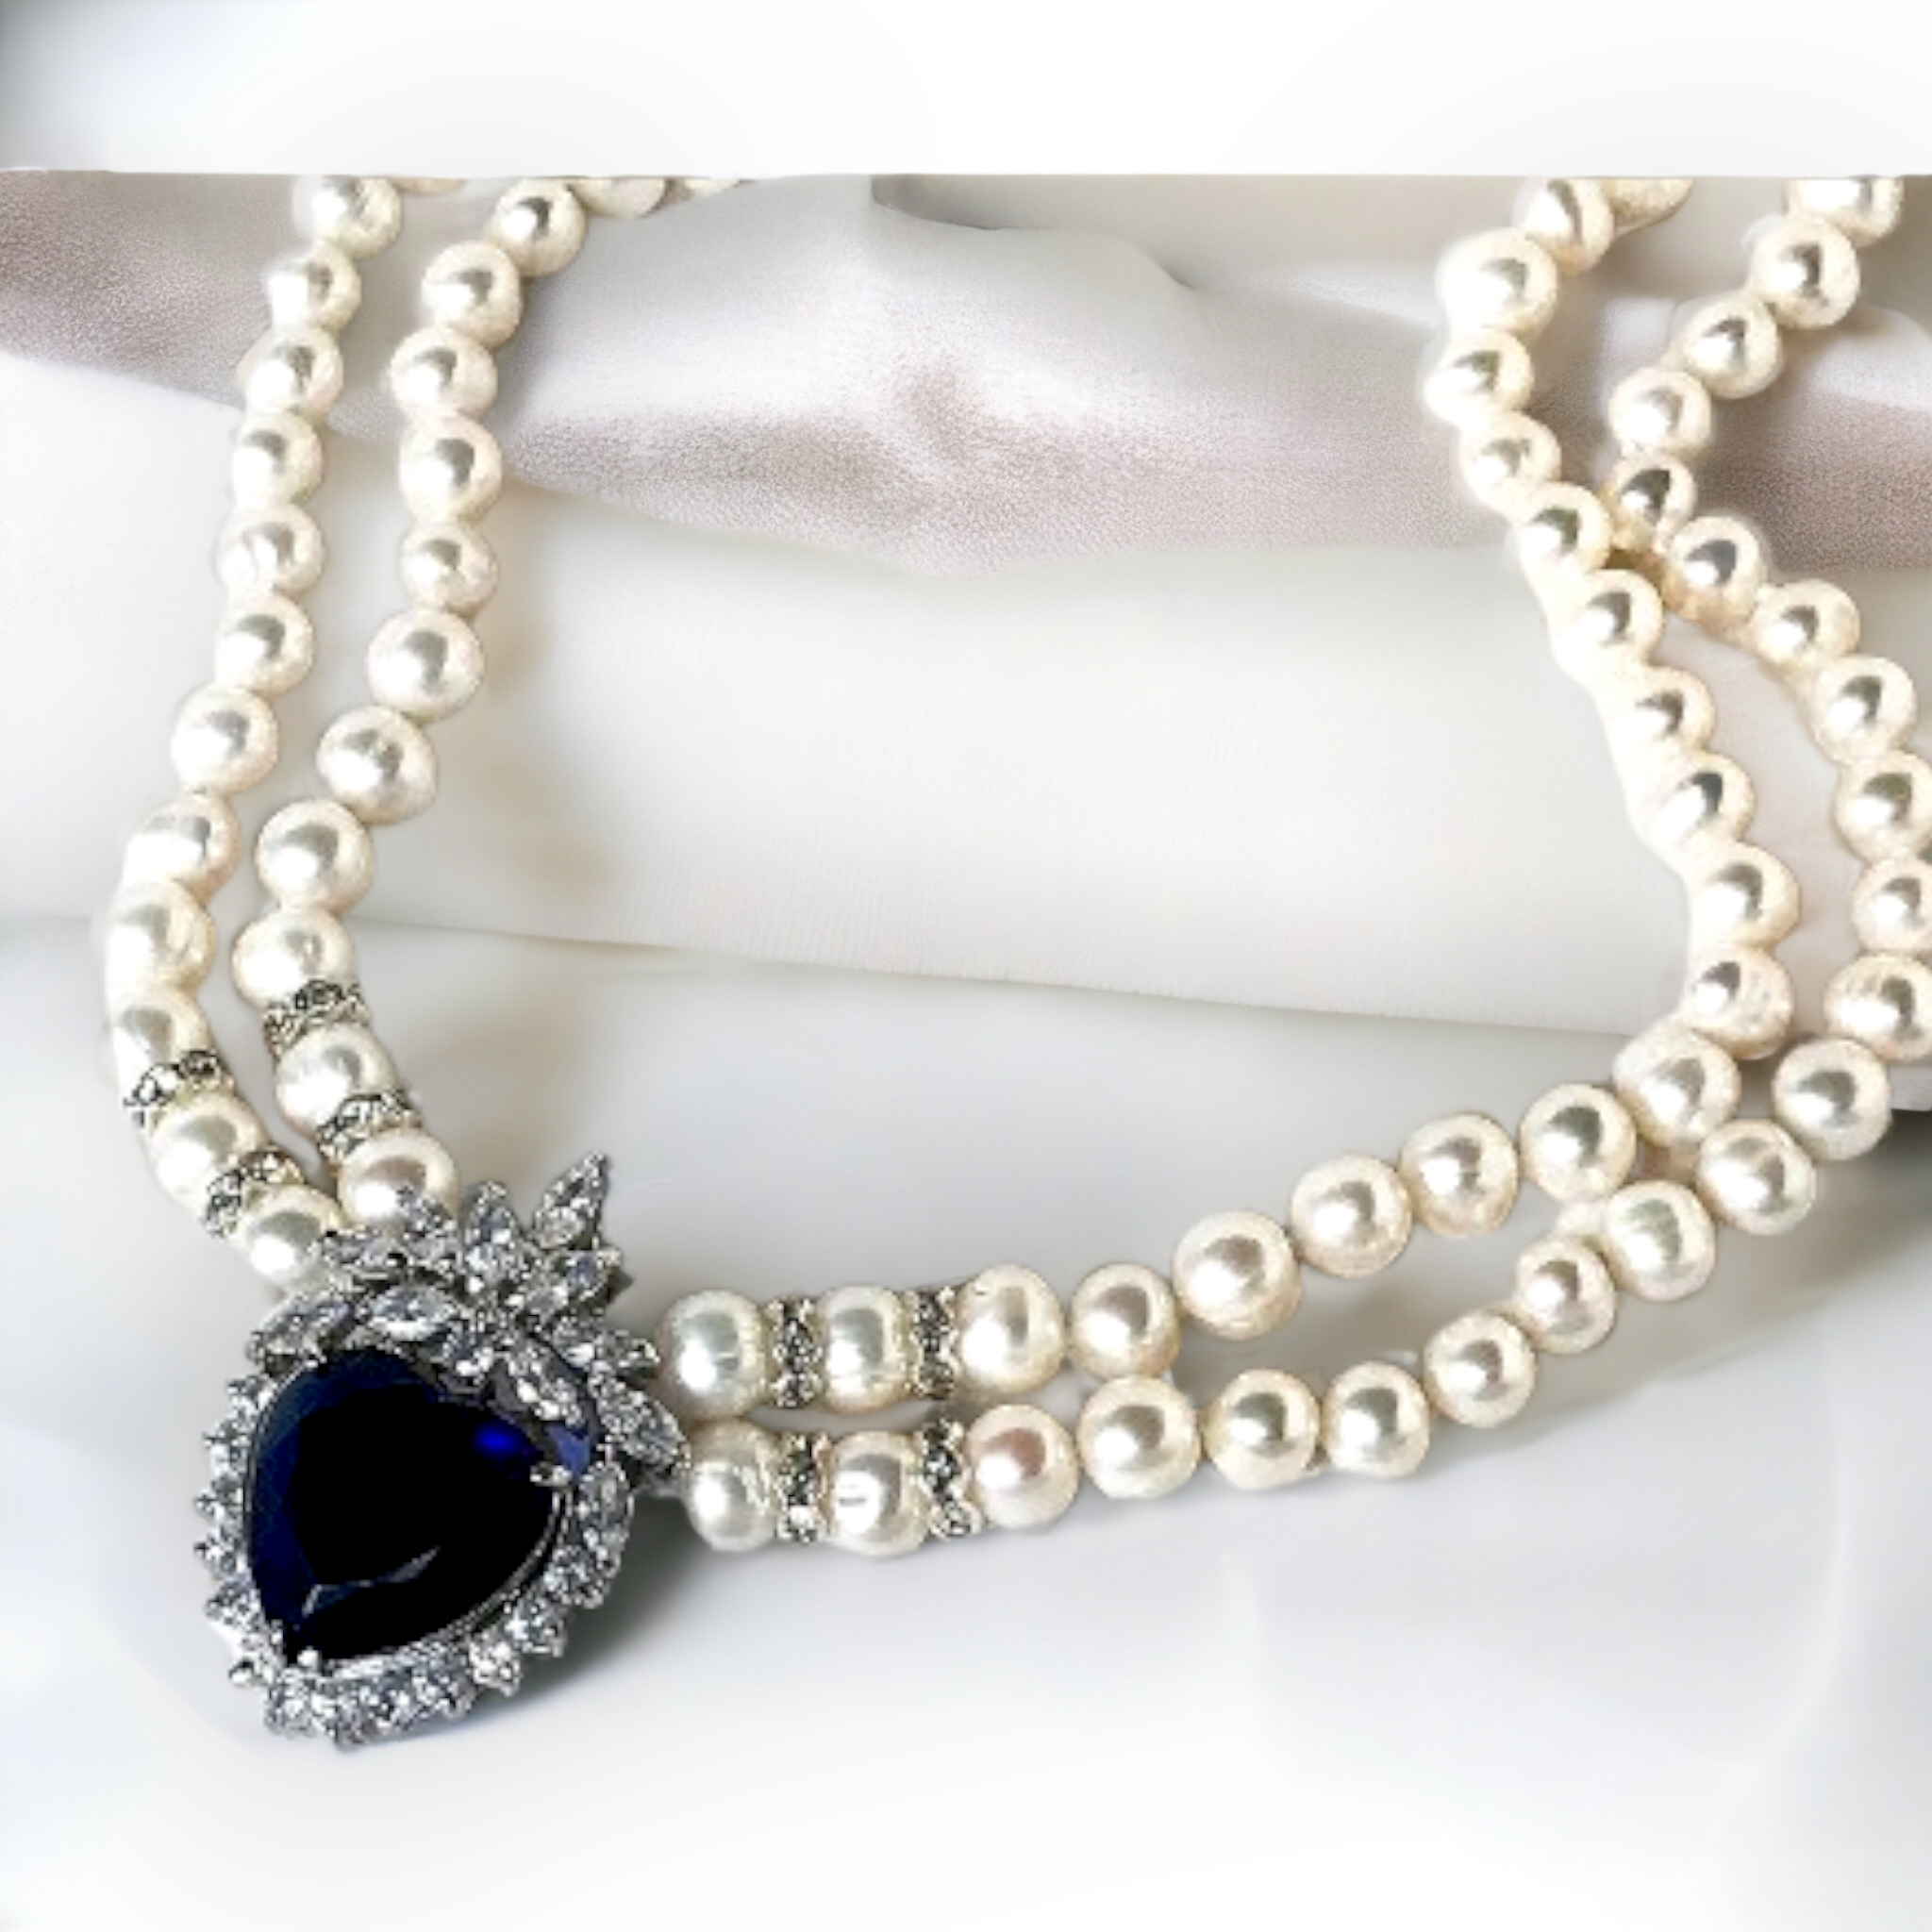 Elegant White Pearl Necklace with Blue Crystal Heart Pendant